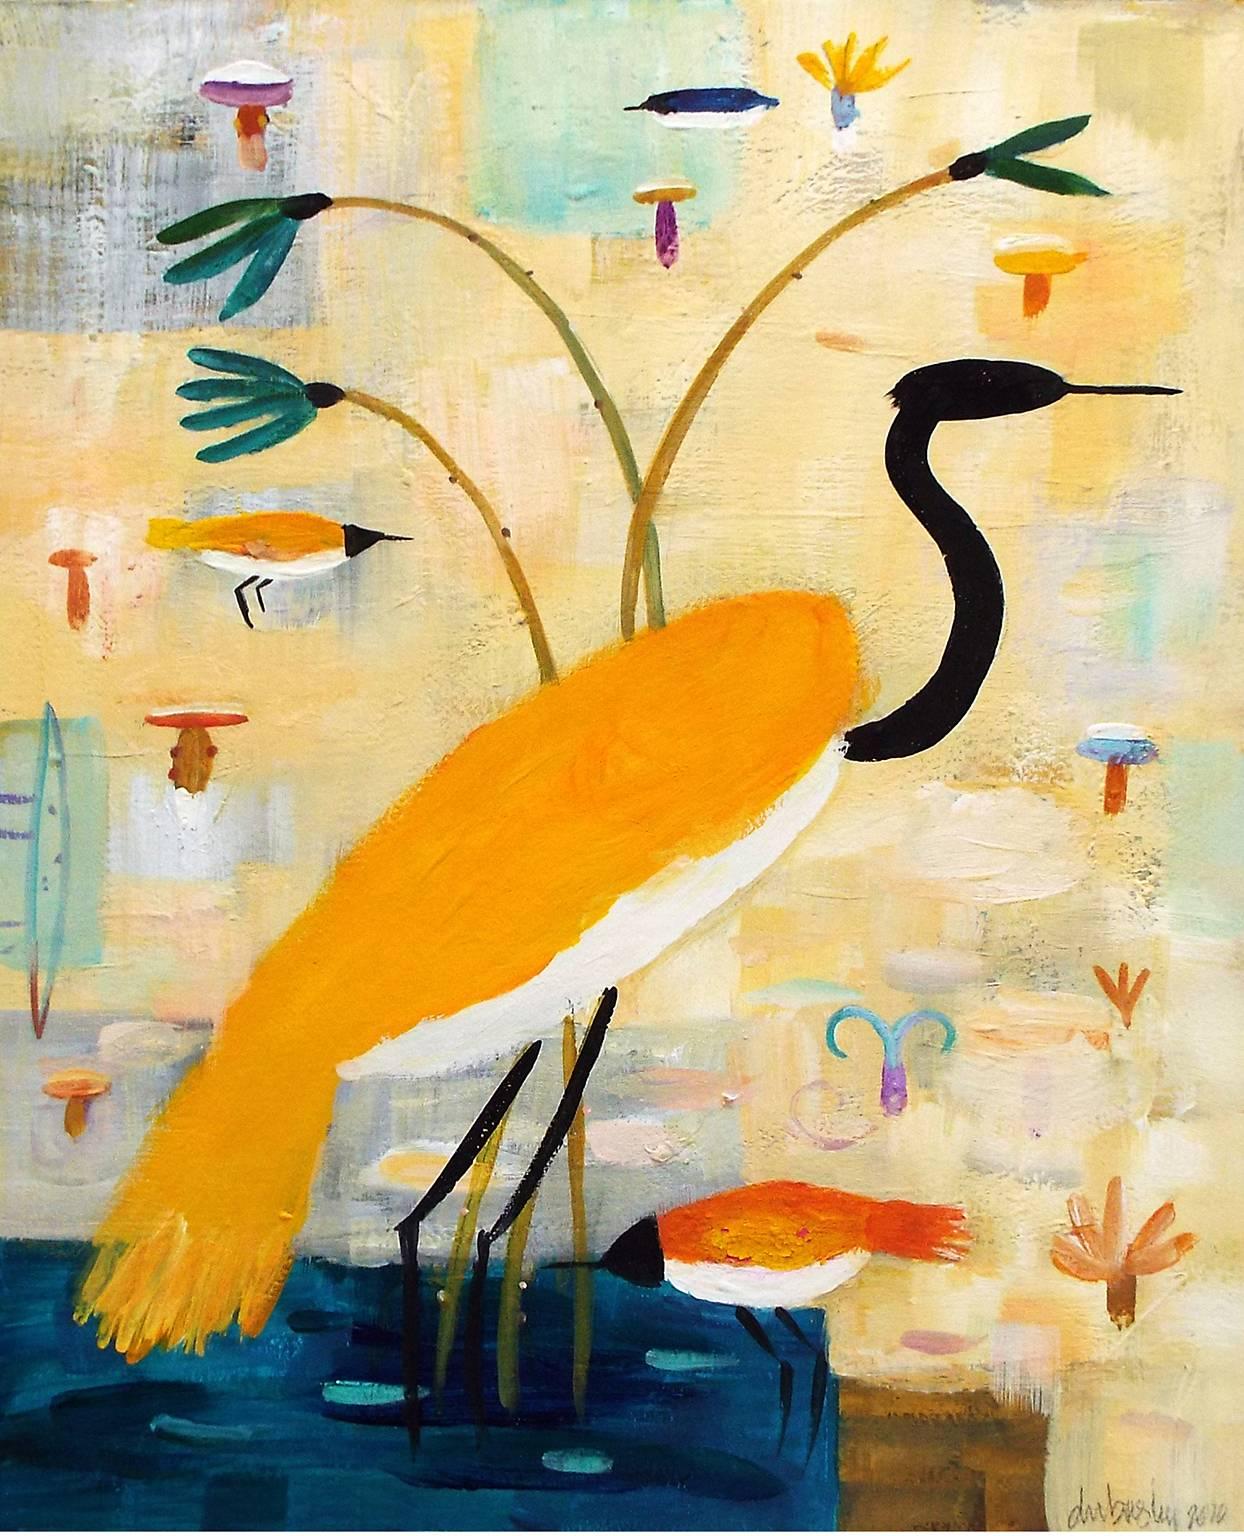 Valentina DuBasky Abstract Painting - "Amber Crane and Reeds", in yellows and blues